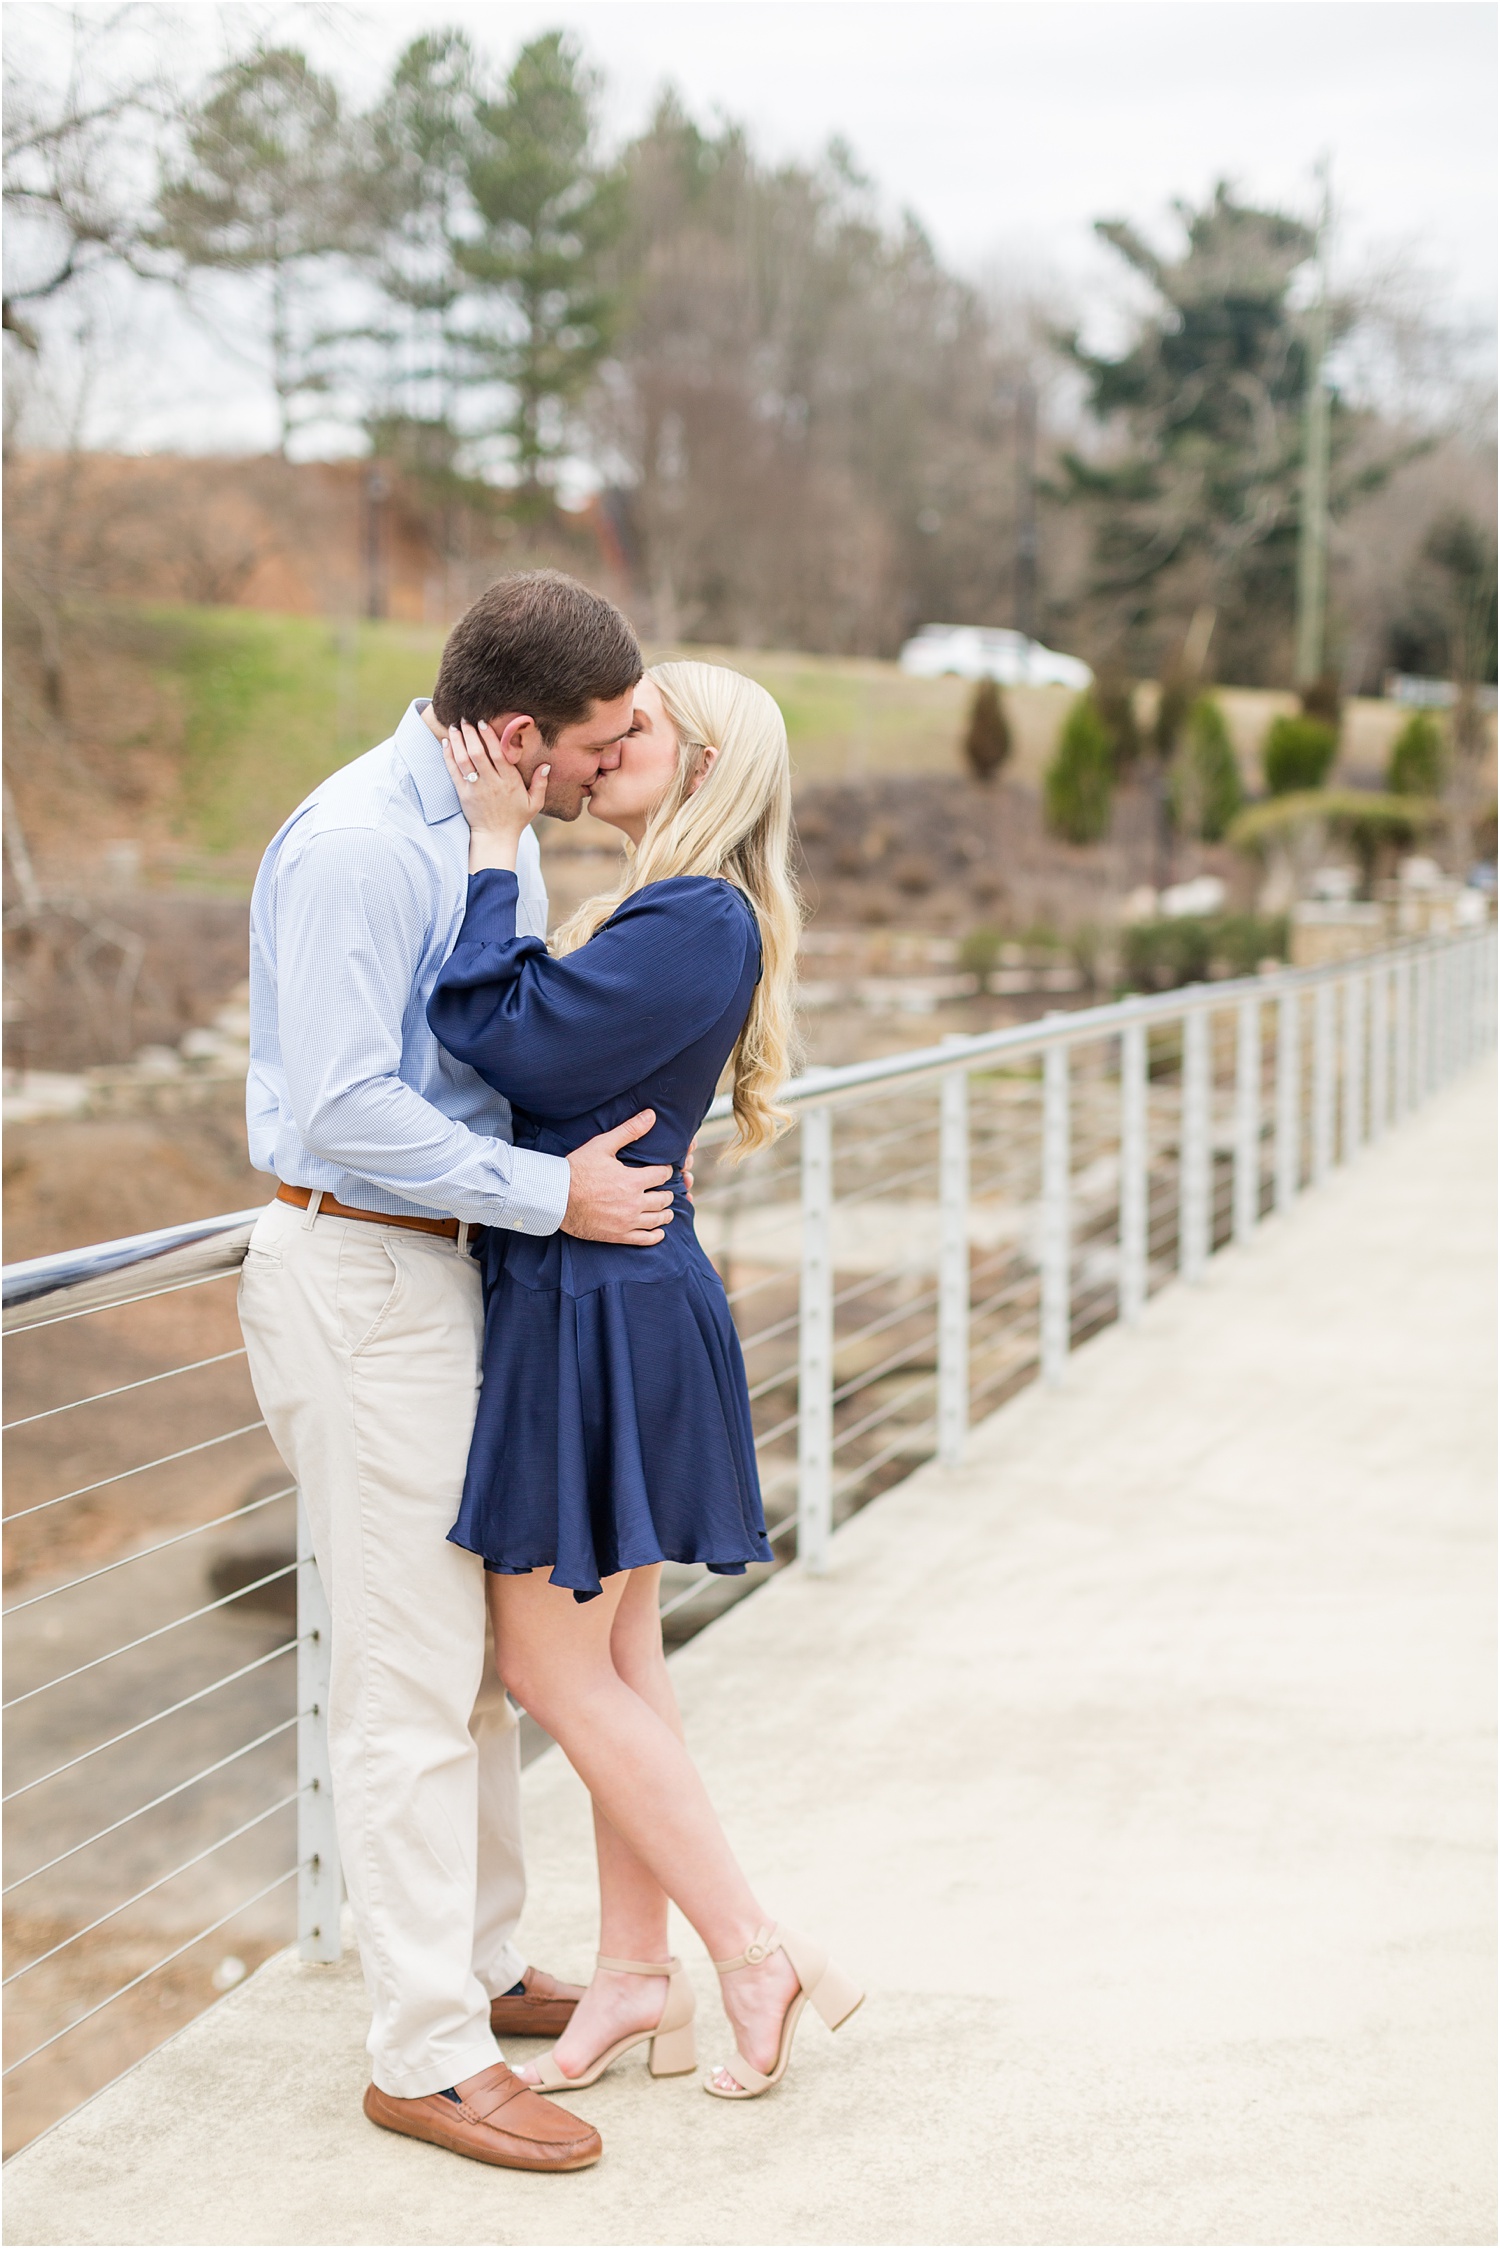 Early Spring Downtown Greenville Engagement